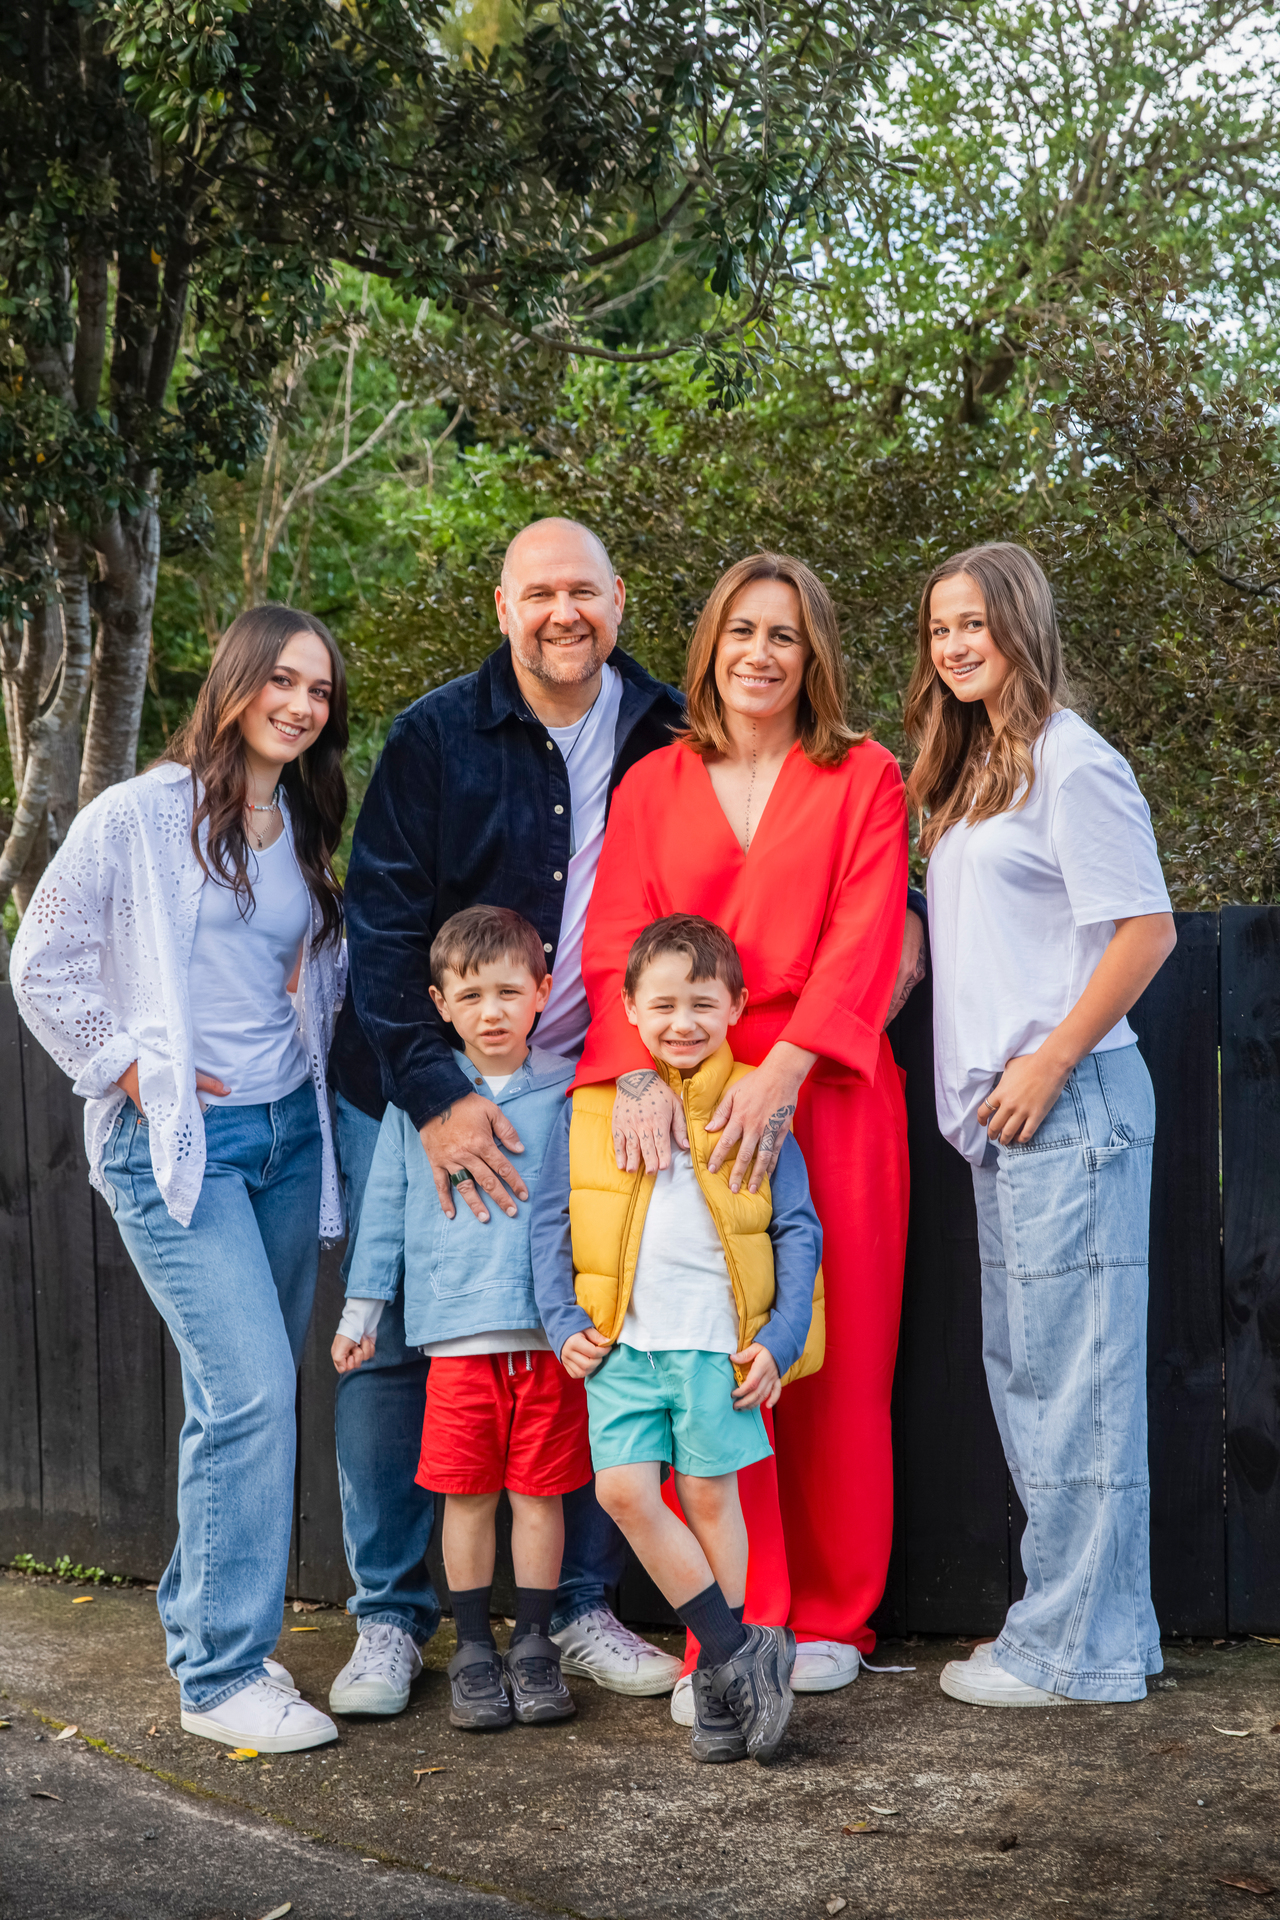 TVNZ Breakfast presenter Jenny-May Clarkson on her family triumphs and  challenges - NZ Herald